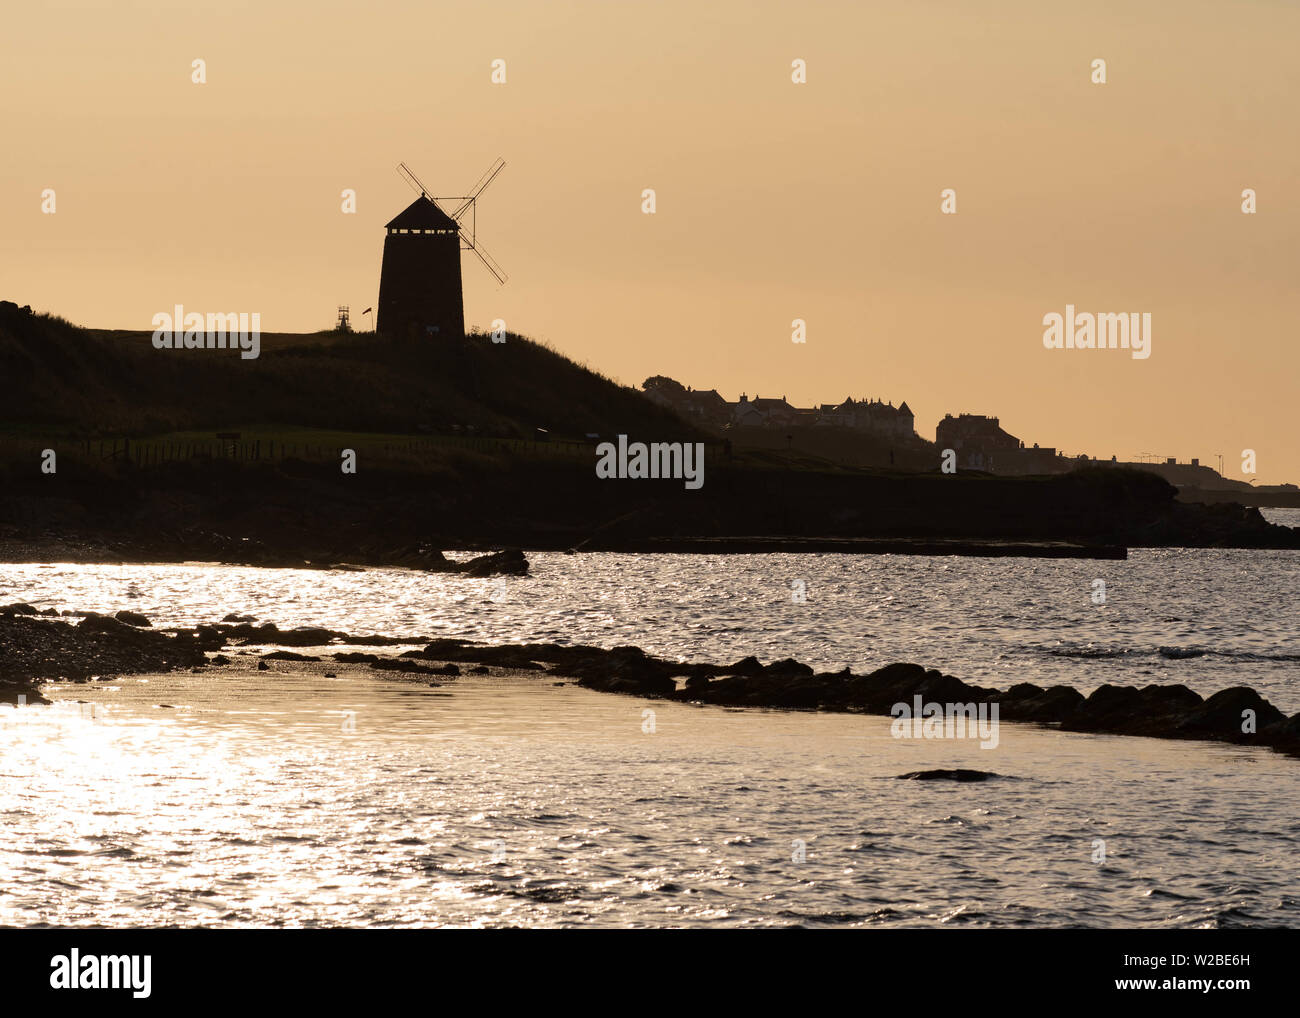 St Monans Windmill, St Monans, Fife, Scotland, UK. 8th July, 2019. UK weather - An idyllic early morning at St Monans Windmill, The East Neuk of Fife, Scotland. The windmill is one of the few reminders of the large scale salt production that took place here in the 18th century, when the windmill was used to pump sea water into the salt pans. Credit: Kay Roxby/Alamy Live News Stock Photo